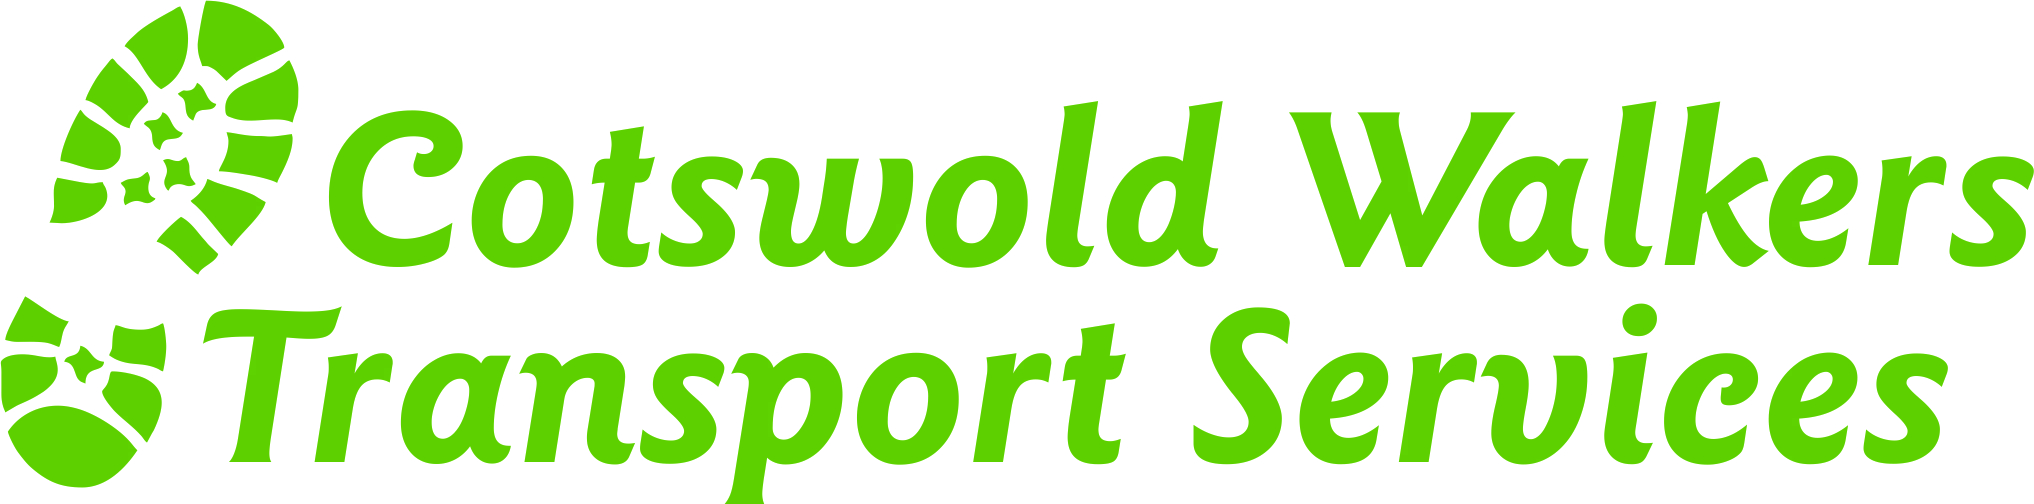 Cotswold Walkers Transport Services